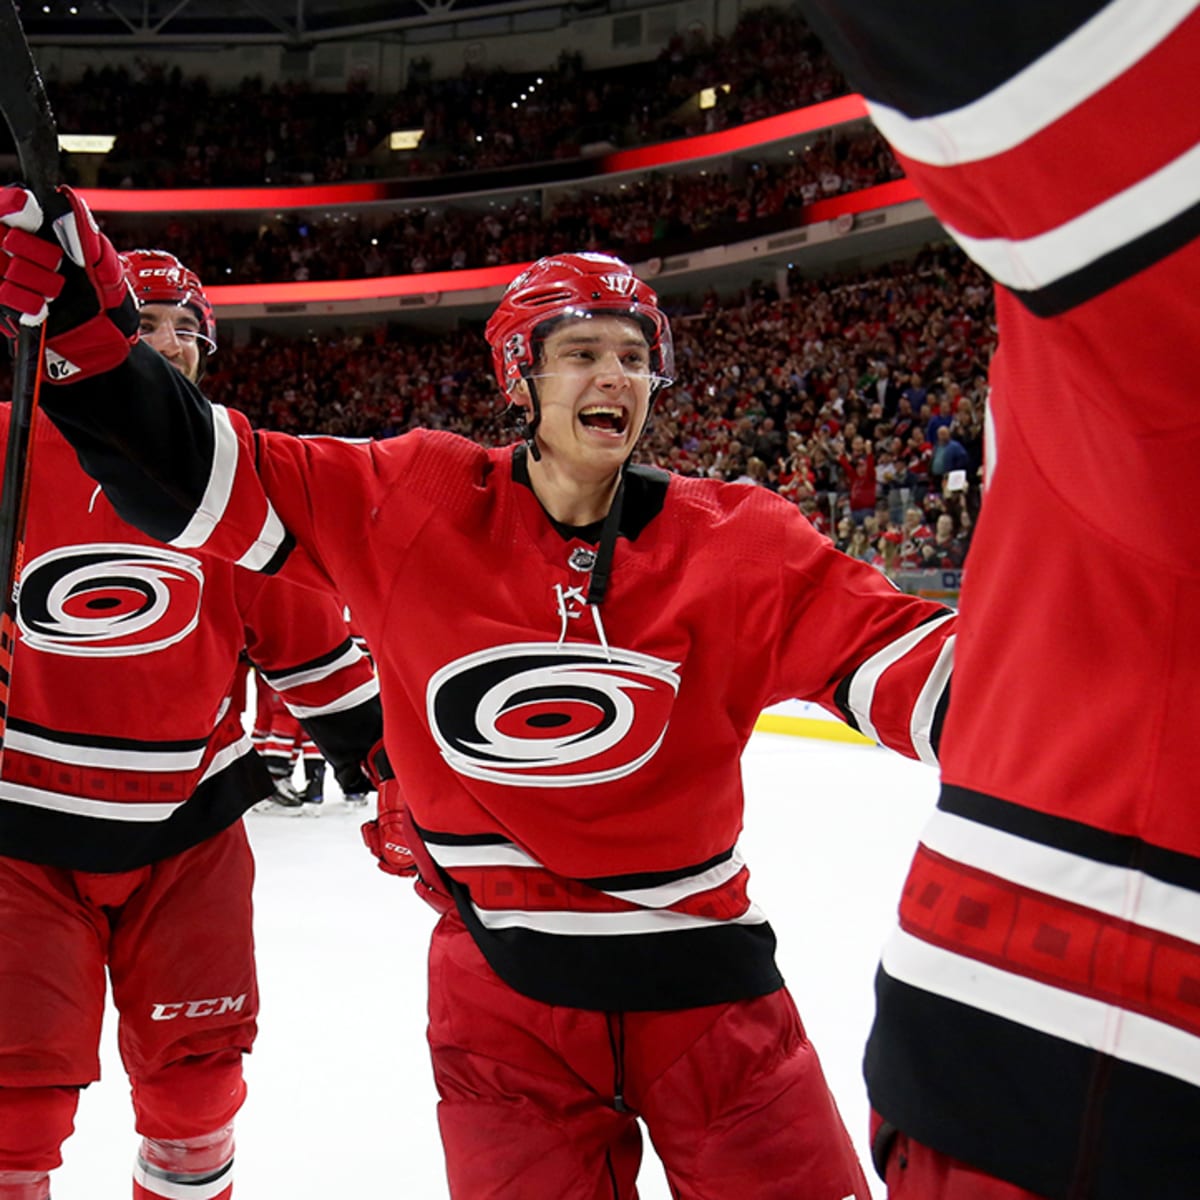 Hurricanes overcome injuries to reach 2nd round of playoffs - The